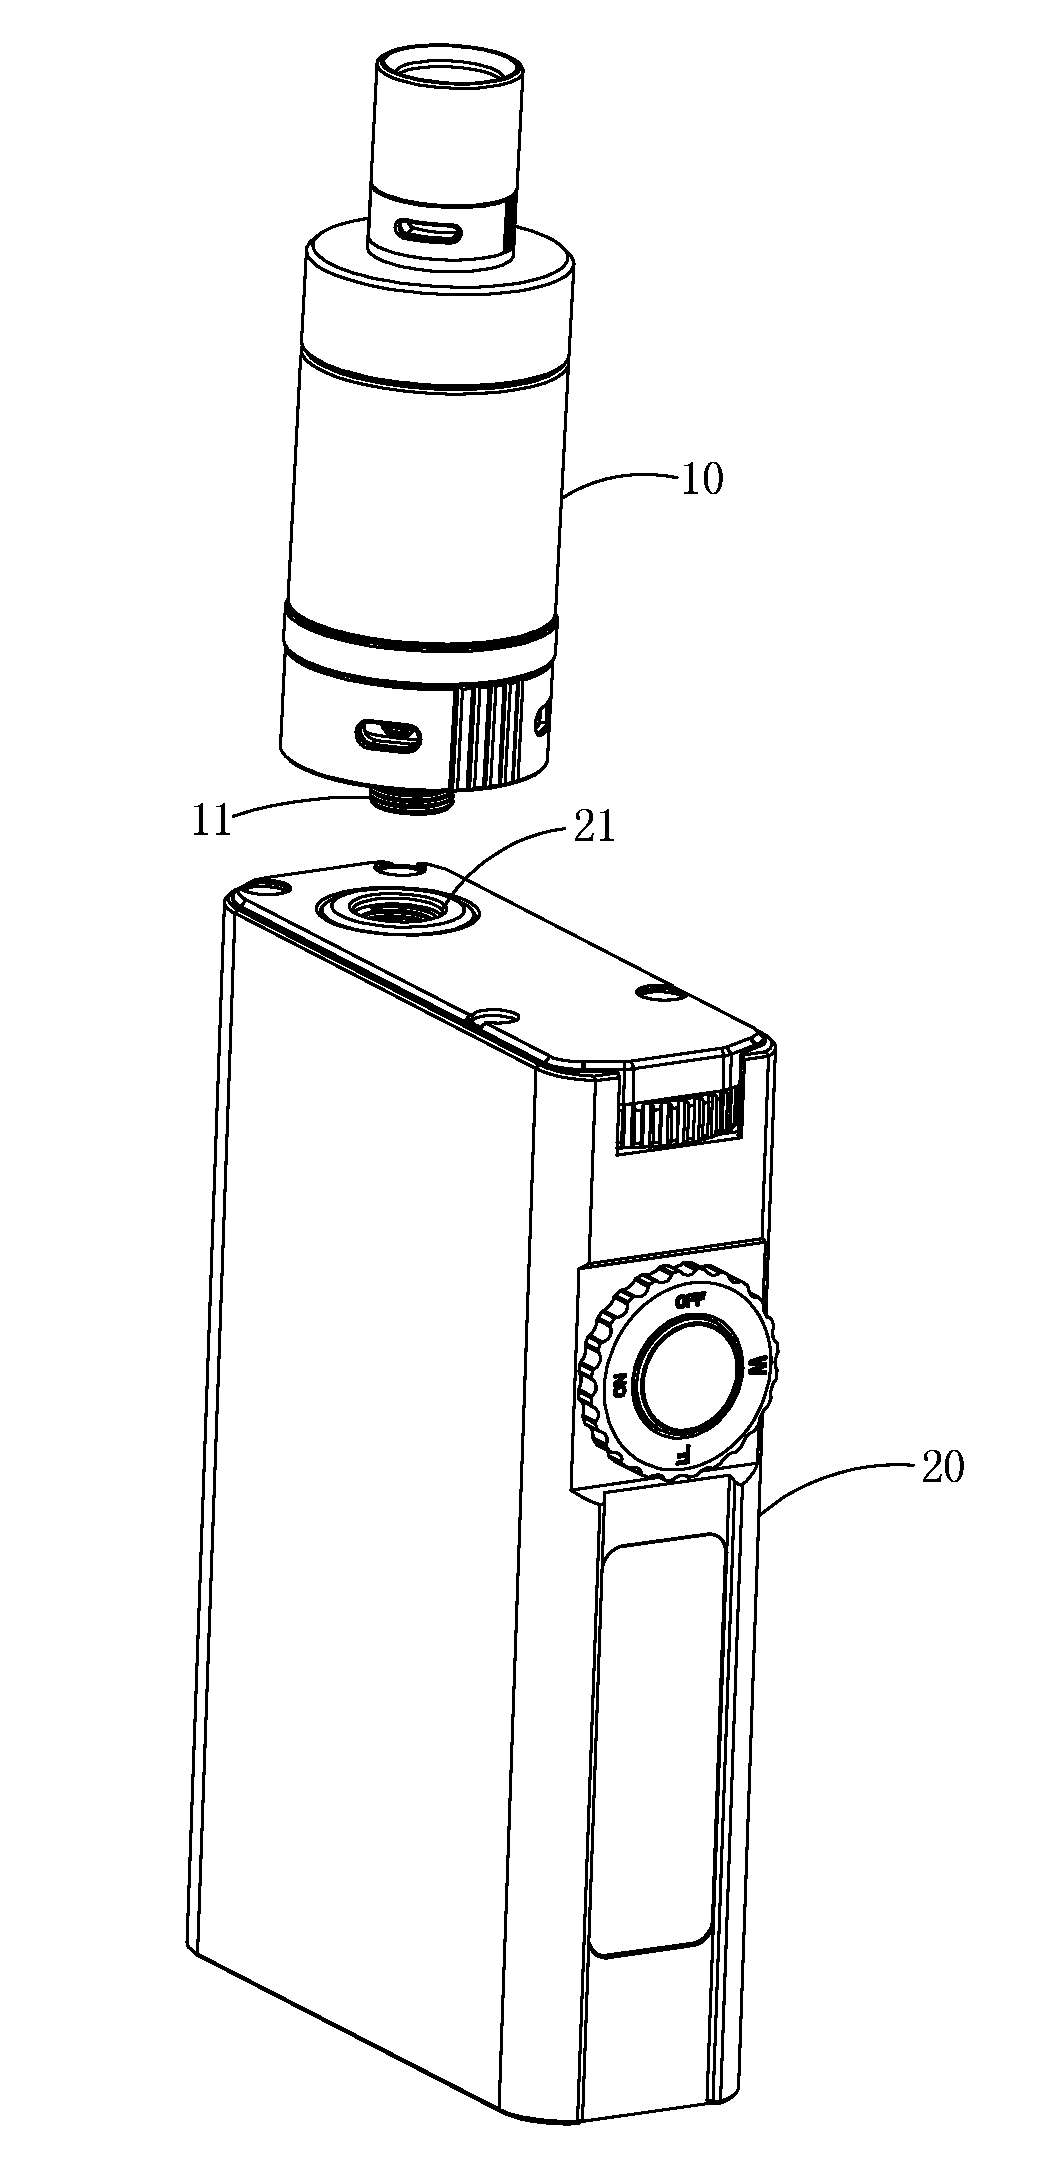 Power supply device for electronic atomizer